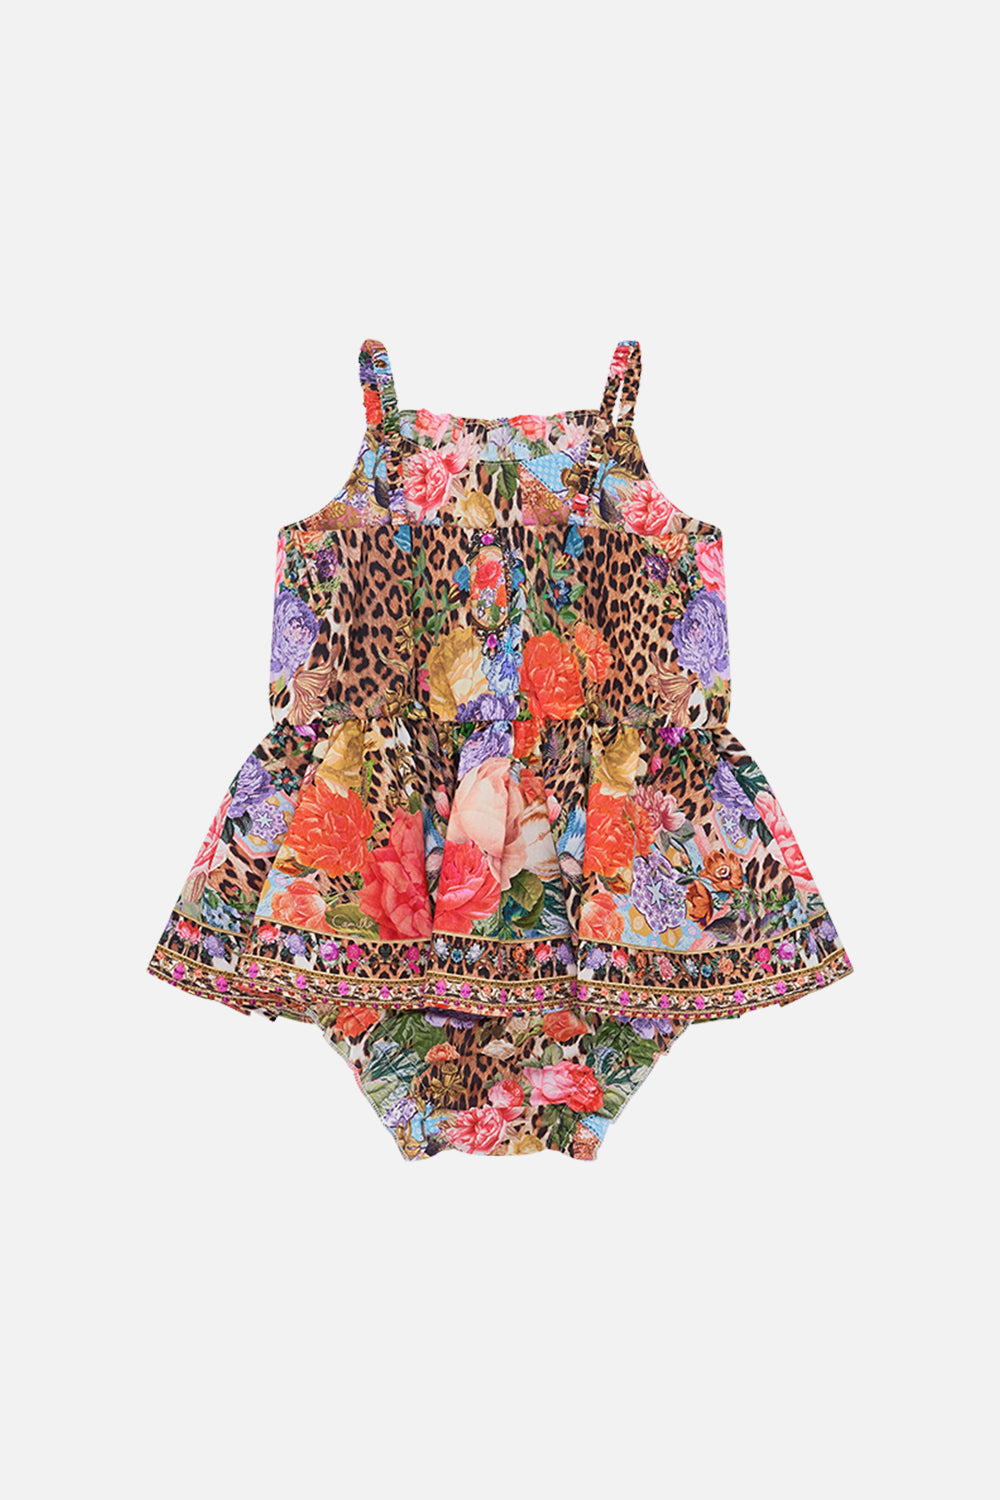 Milla by CAMILLA floral babies jumpdress in Heirloom Anthem